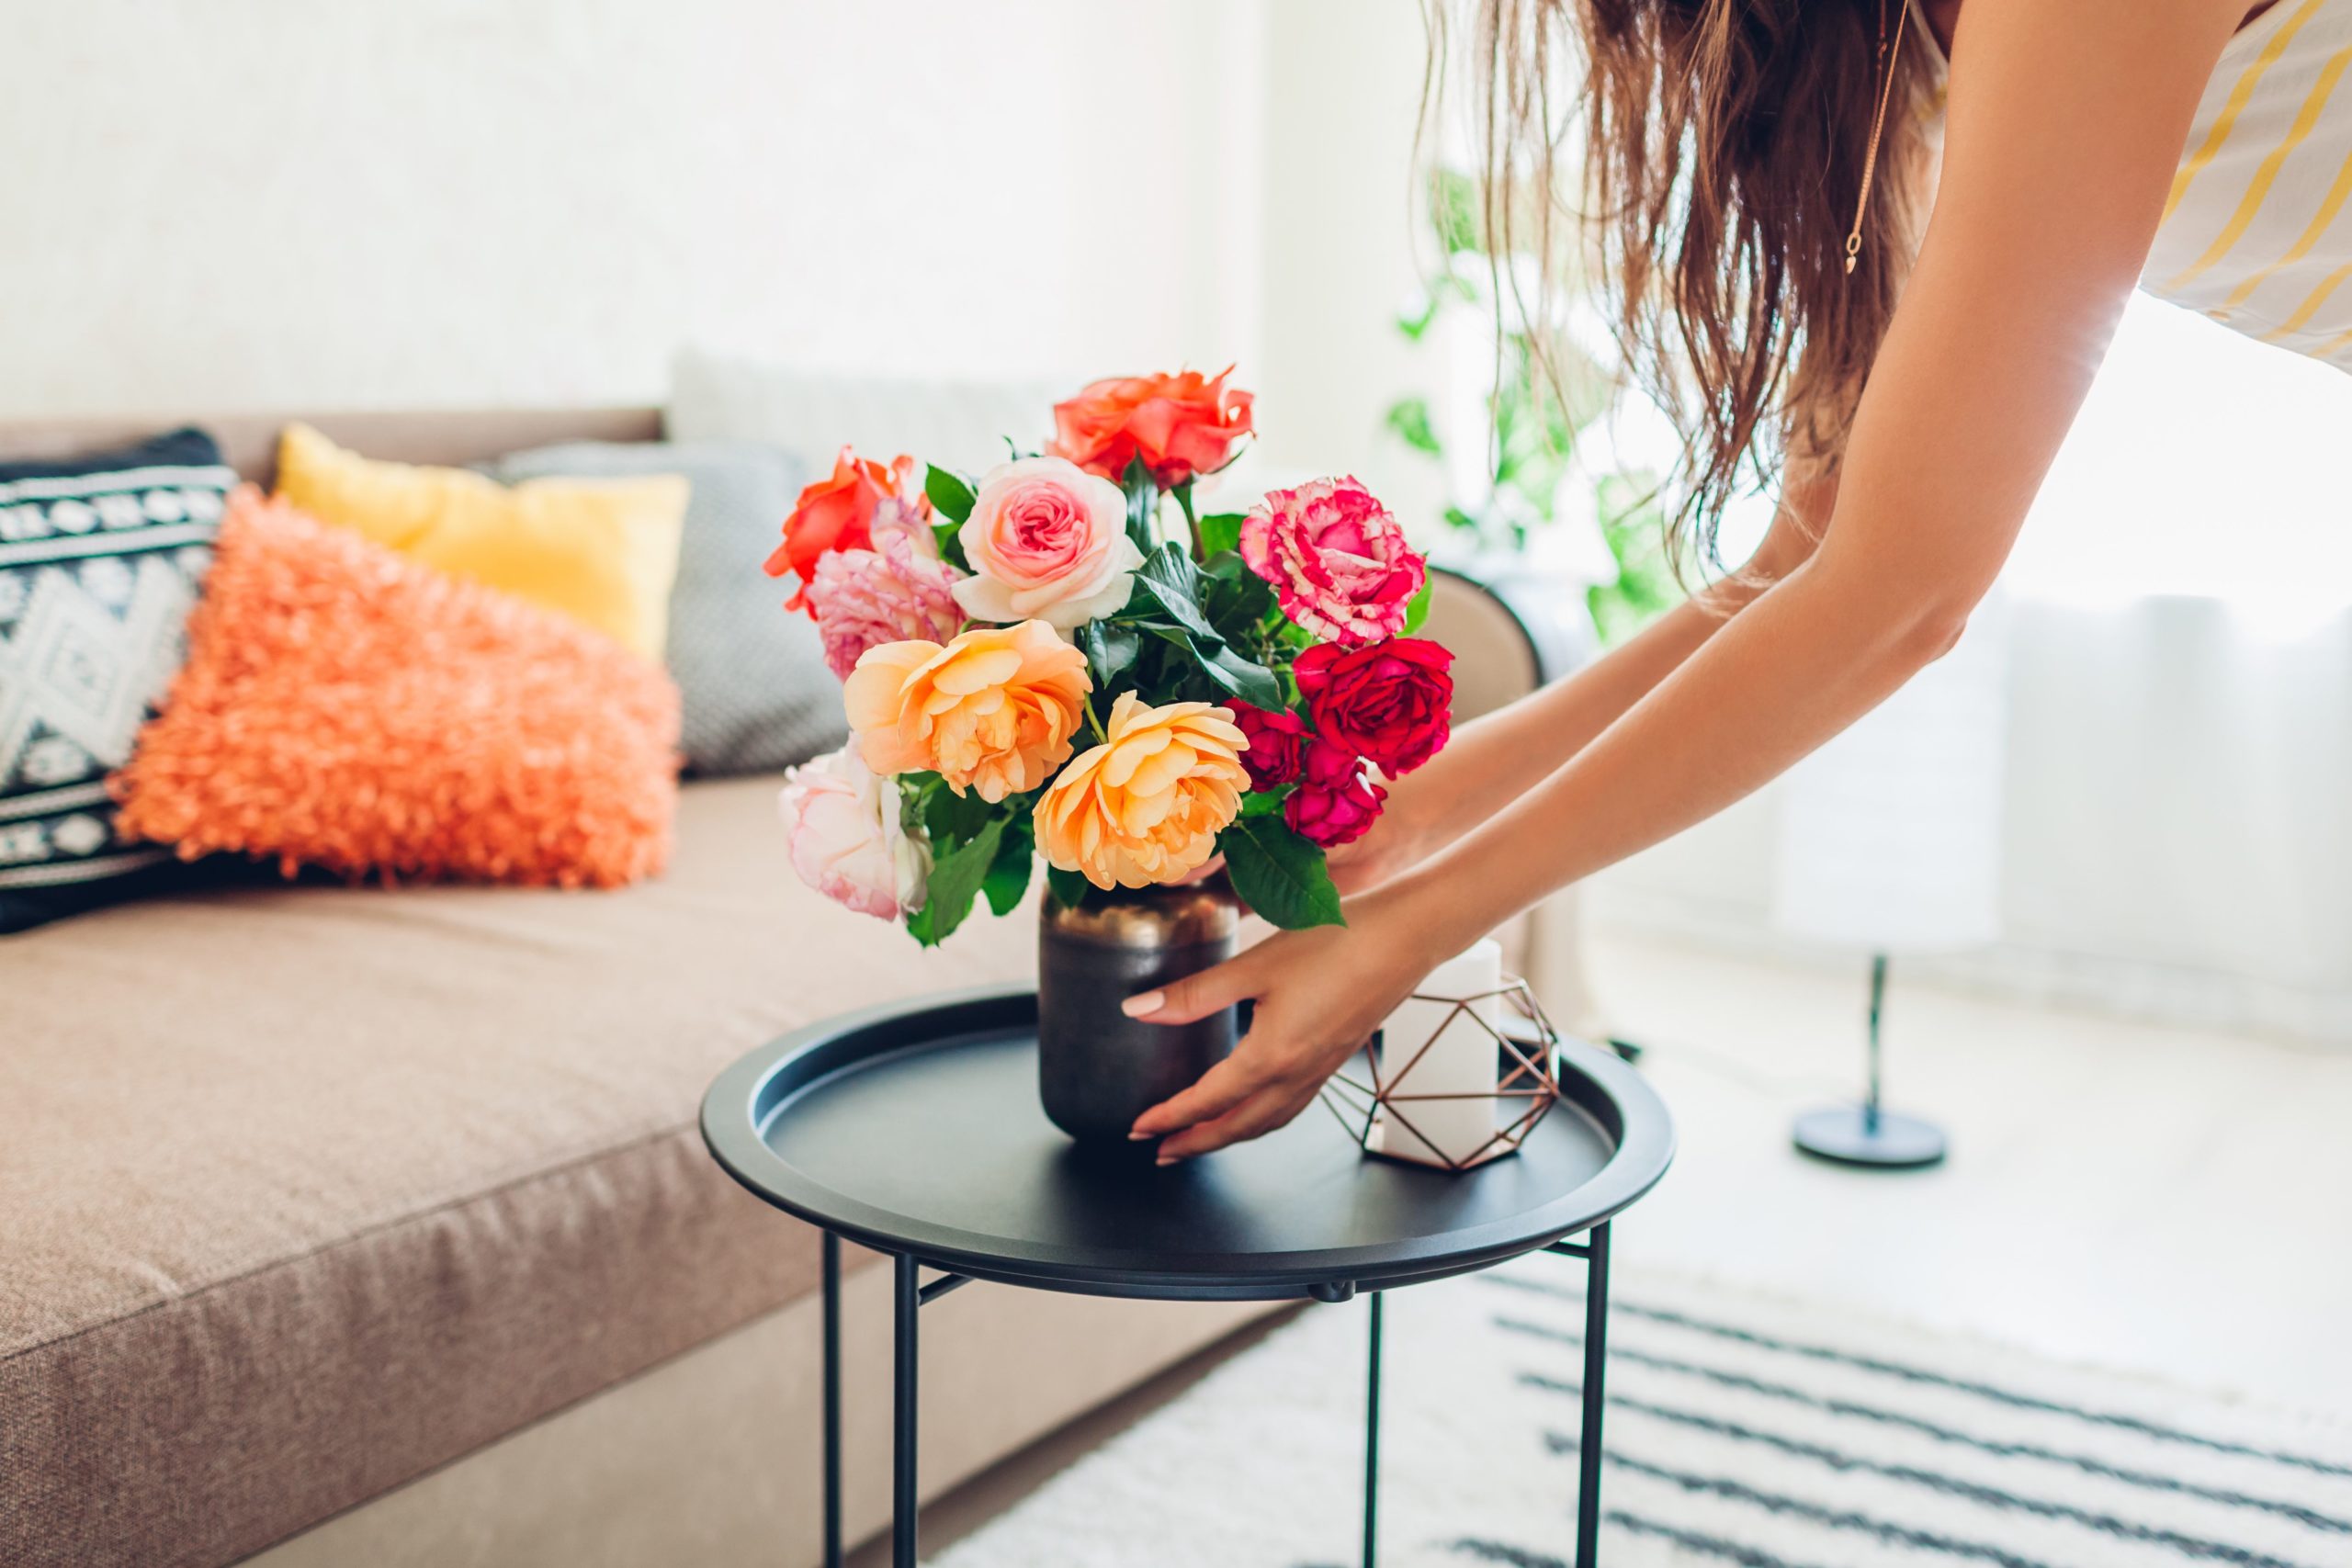 Woman puts vase of red and yellow flowers on her coffee table in living room